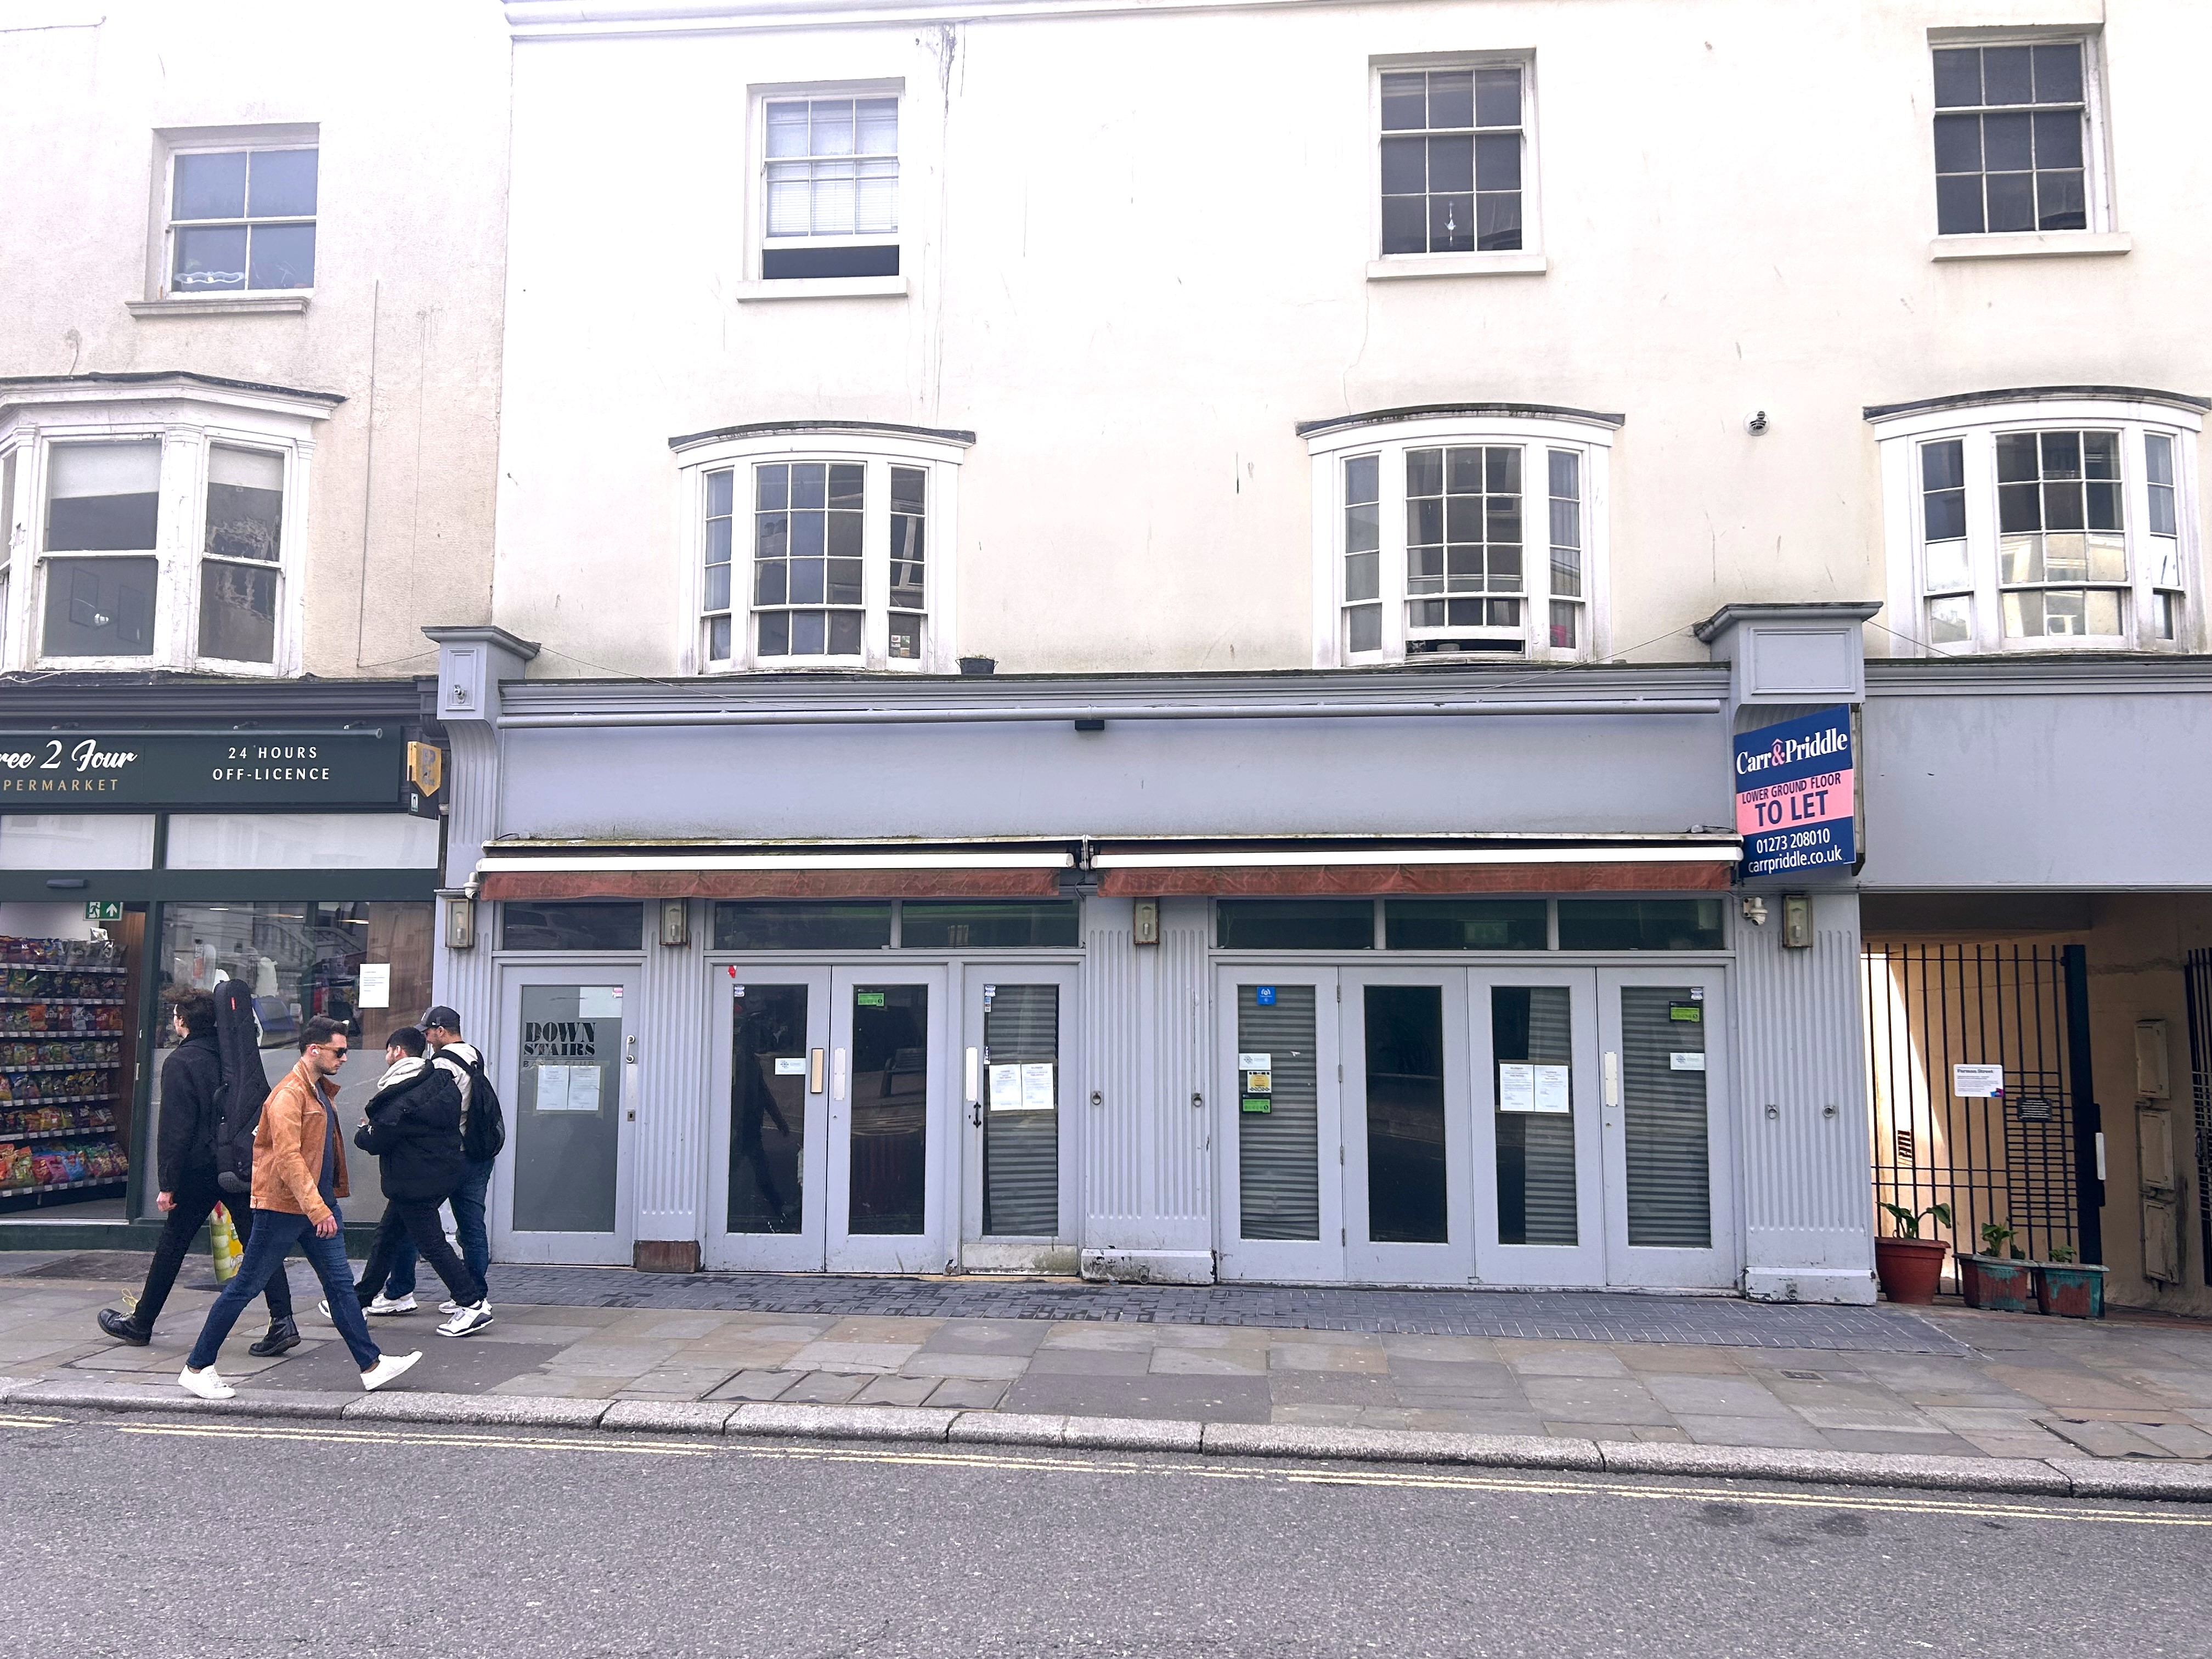 Retail Property (High Street) for rent in Hove. From PS&B - Carr & Priddle - Brighton